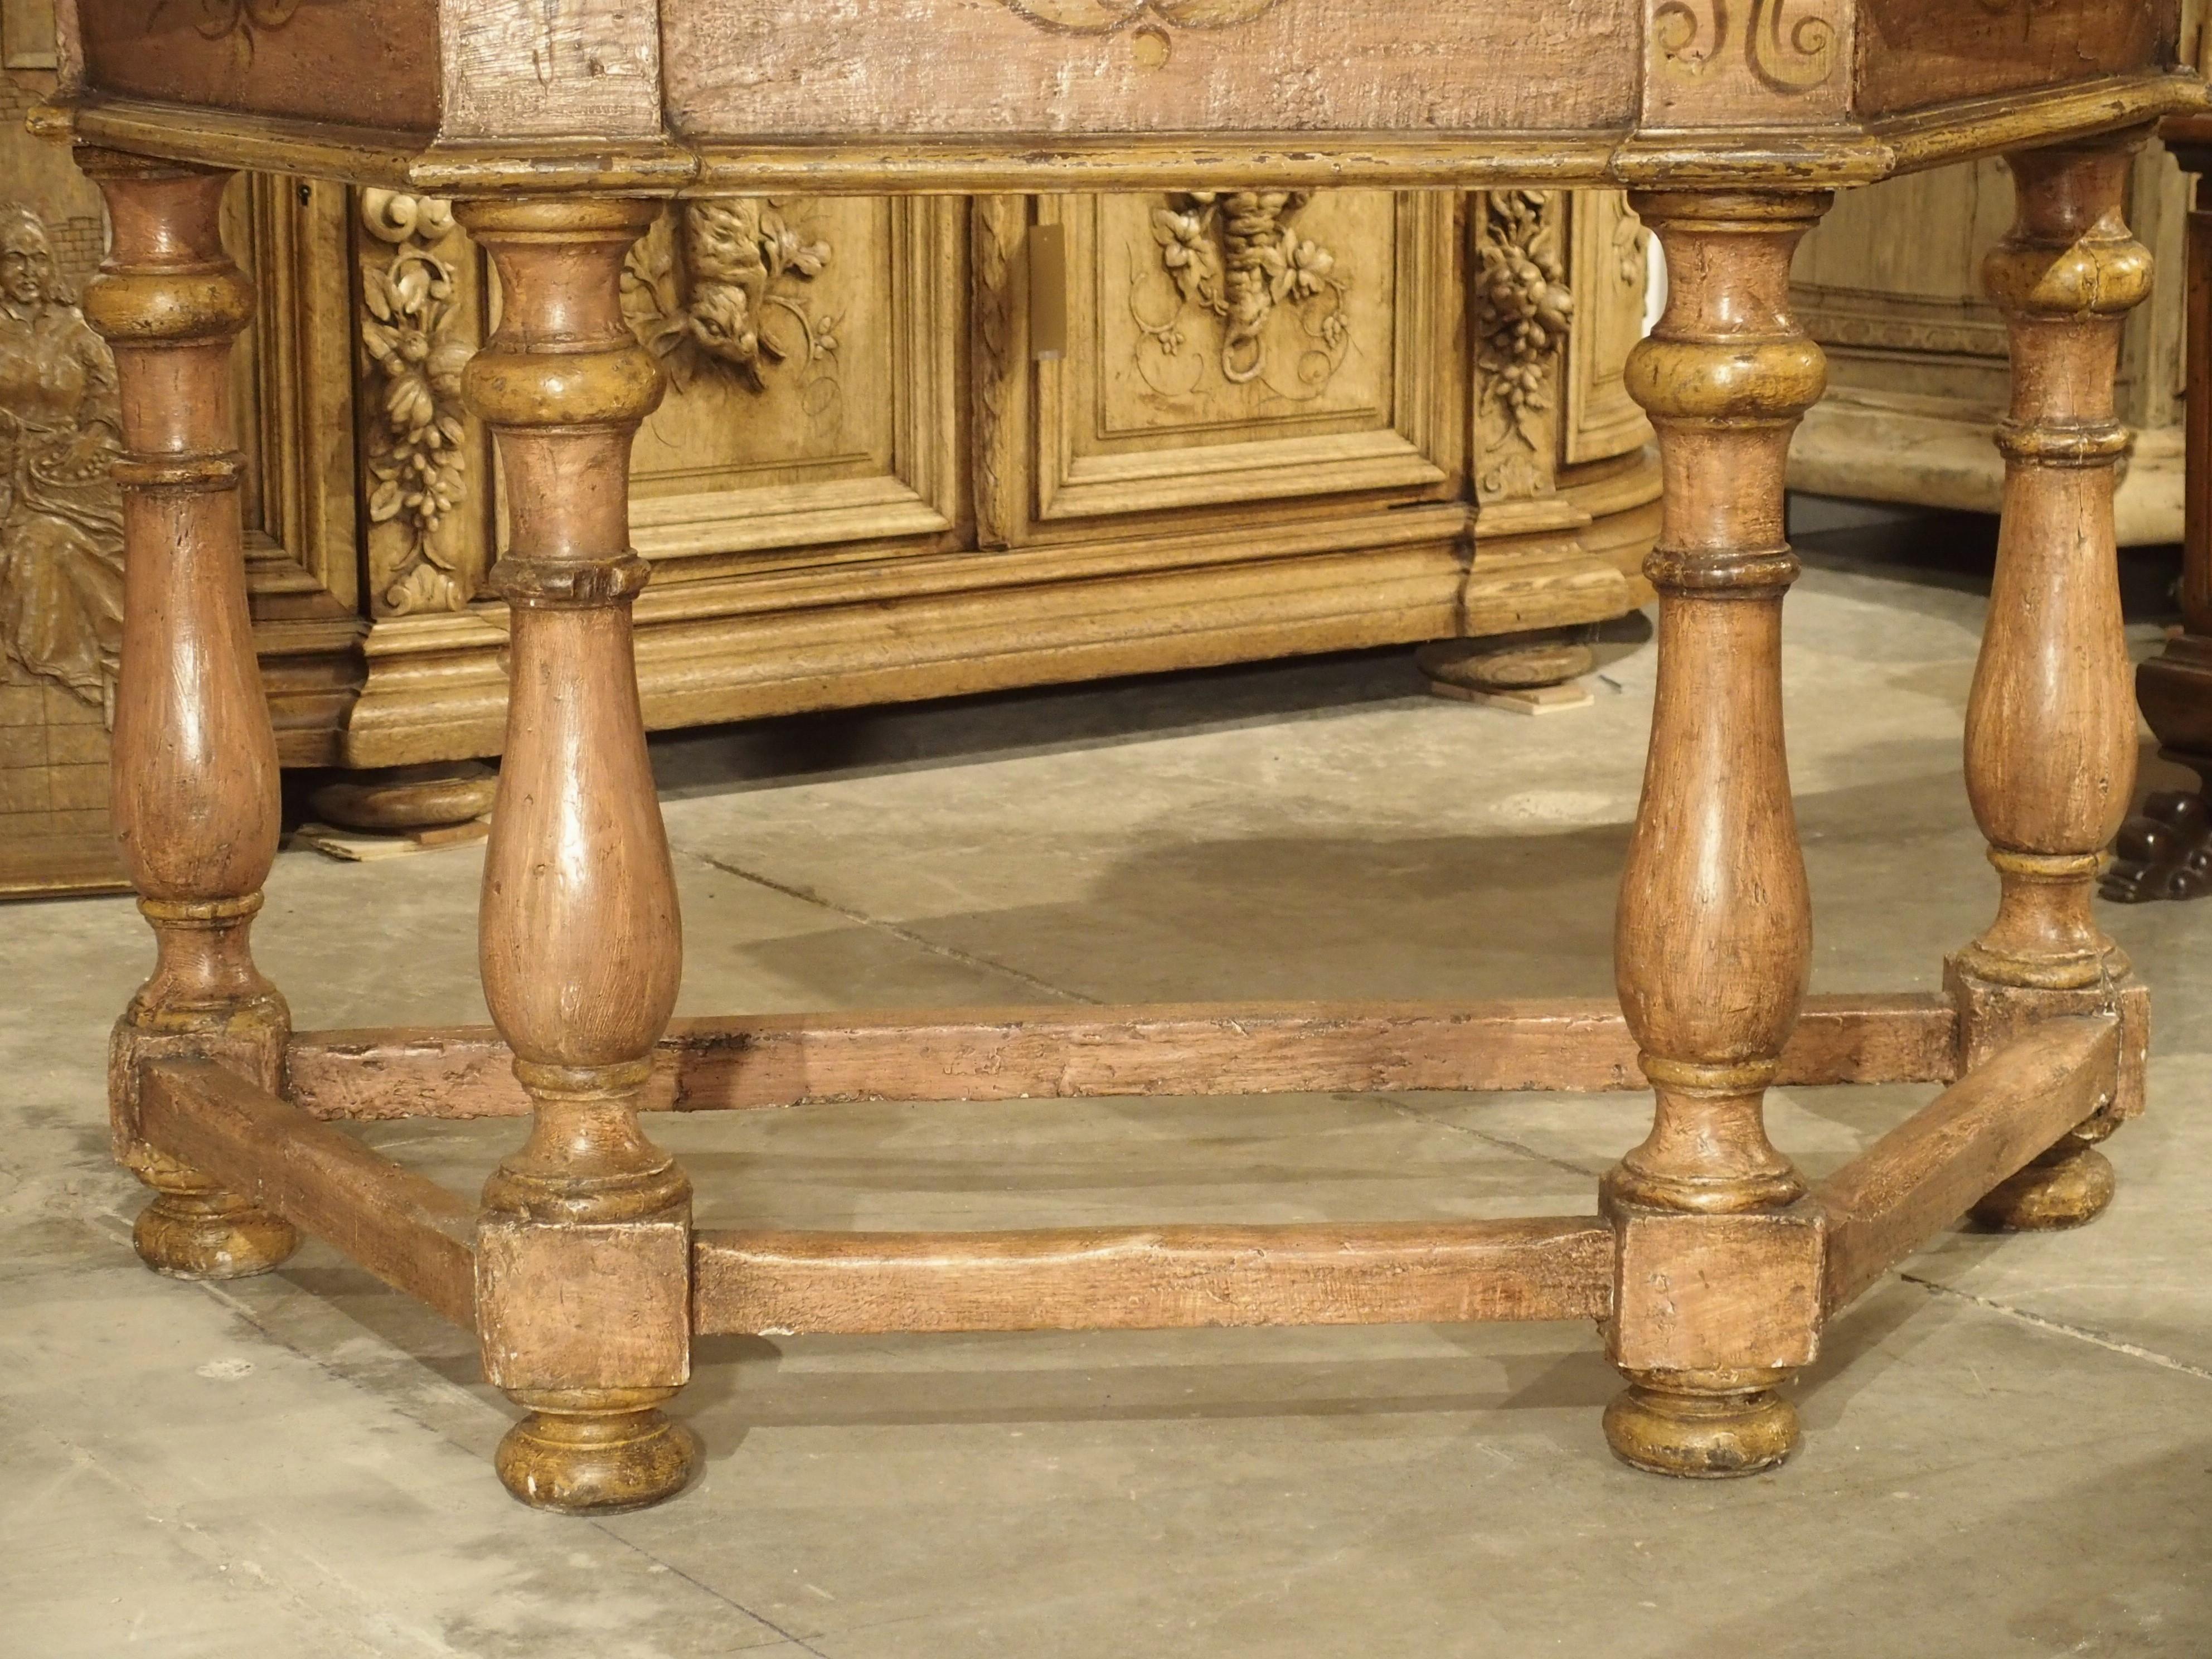 These beautiful antique Italian console tables are painted in an old rose and ochre/gold, and when pushed together, form a lovely octagonal center table. The consoles are relatively plain in their structure: well-considered moldings, no drawers in